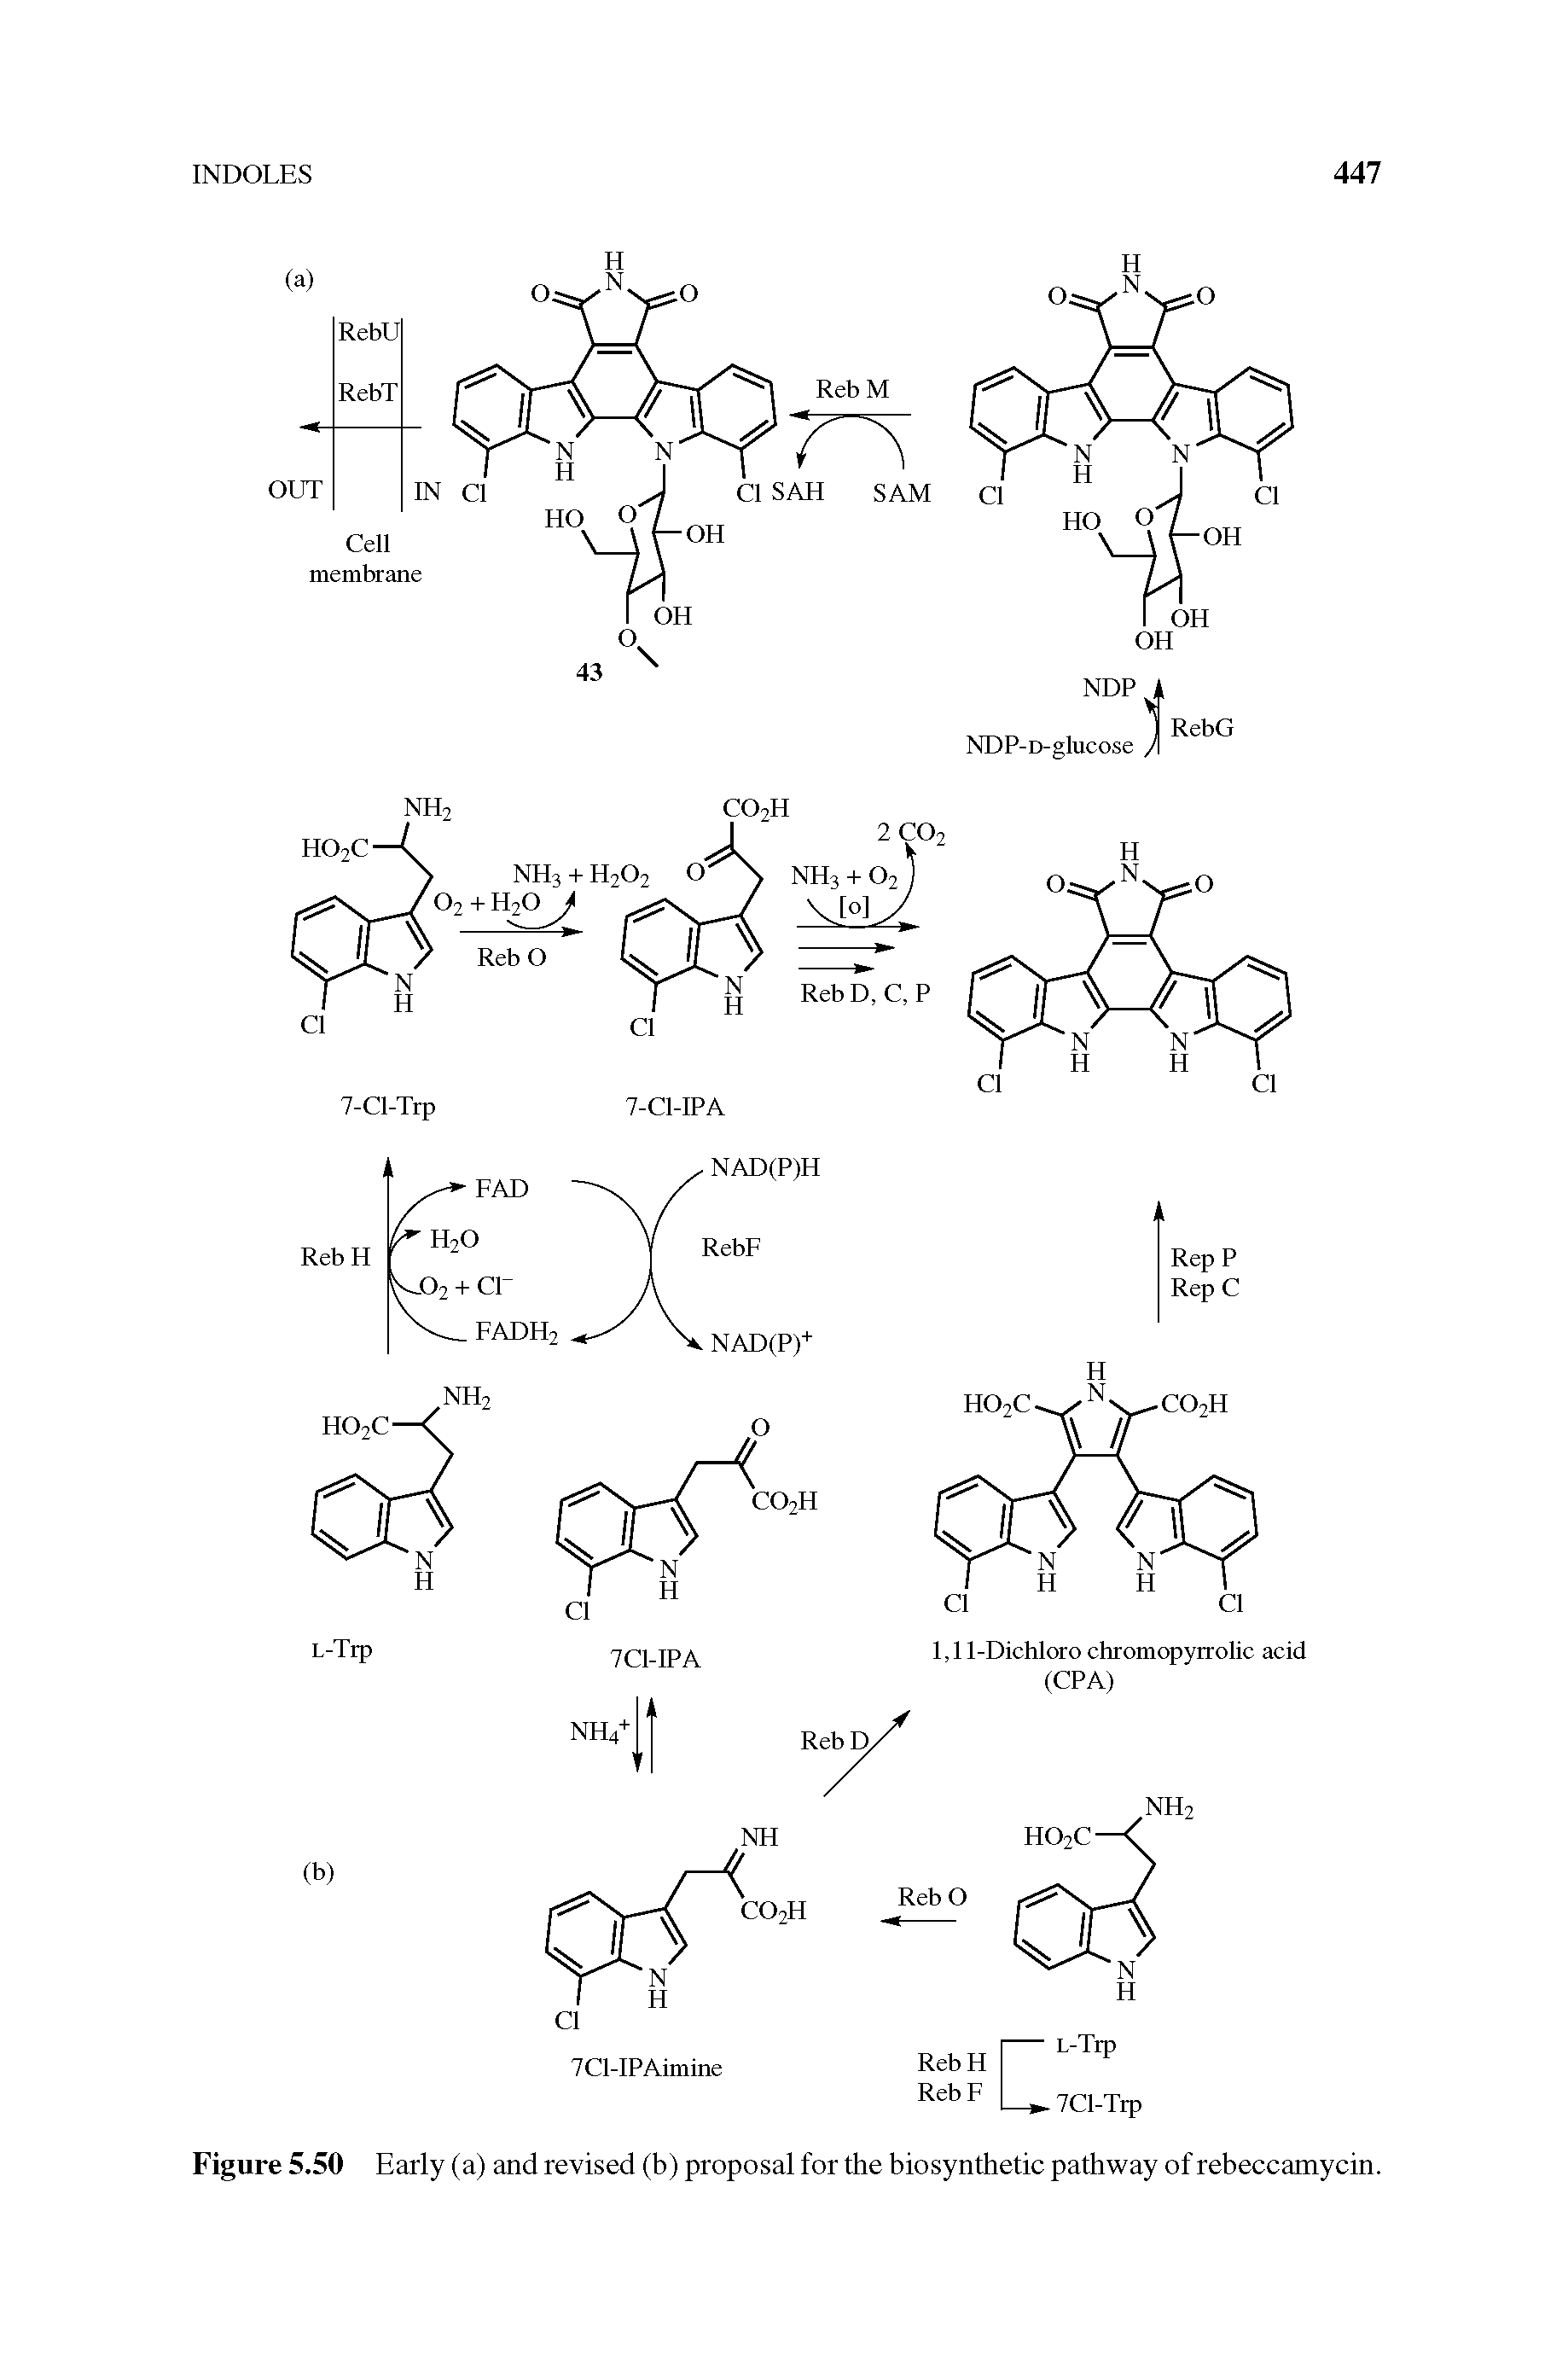 Figure 5.50 Early (a) and revised (b) proposal for the biosynthetic pathway of rebeccamycin.